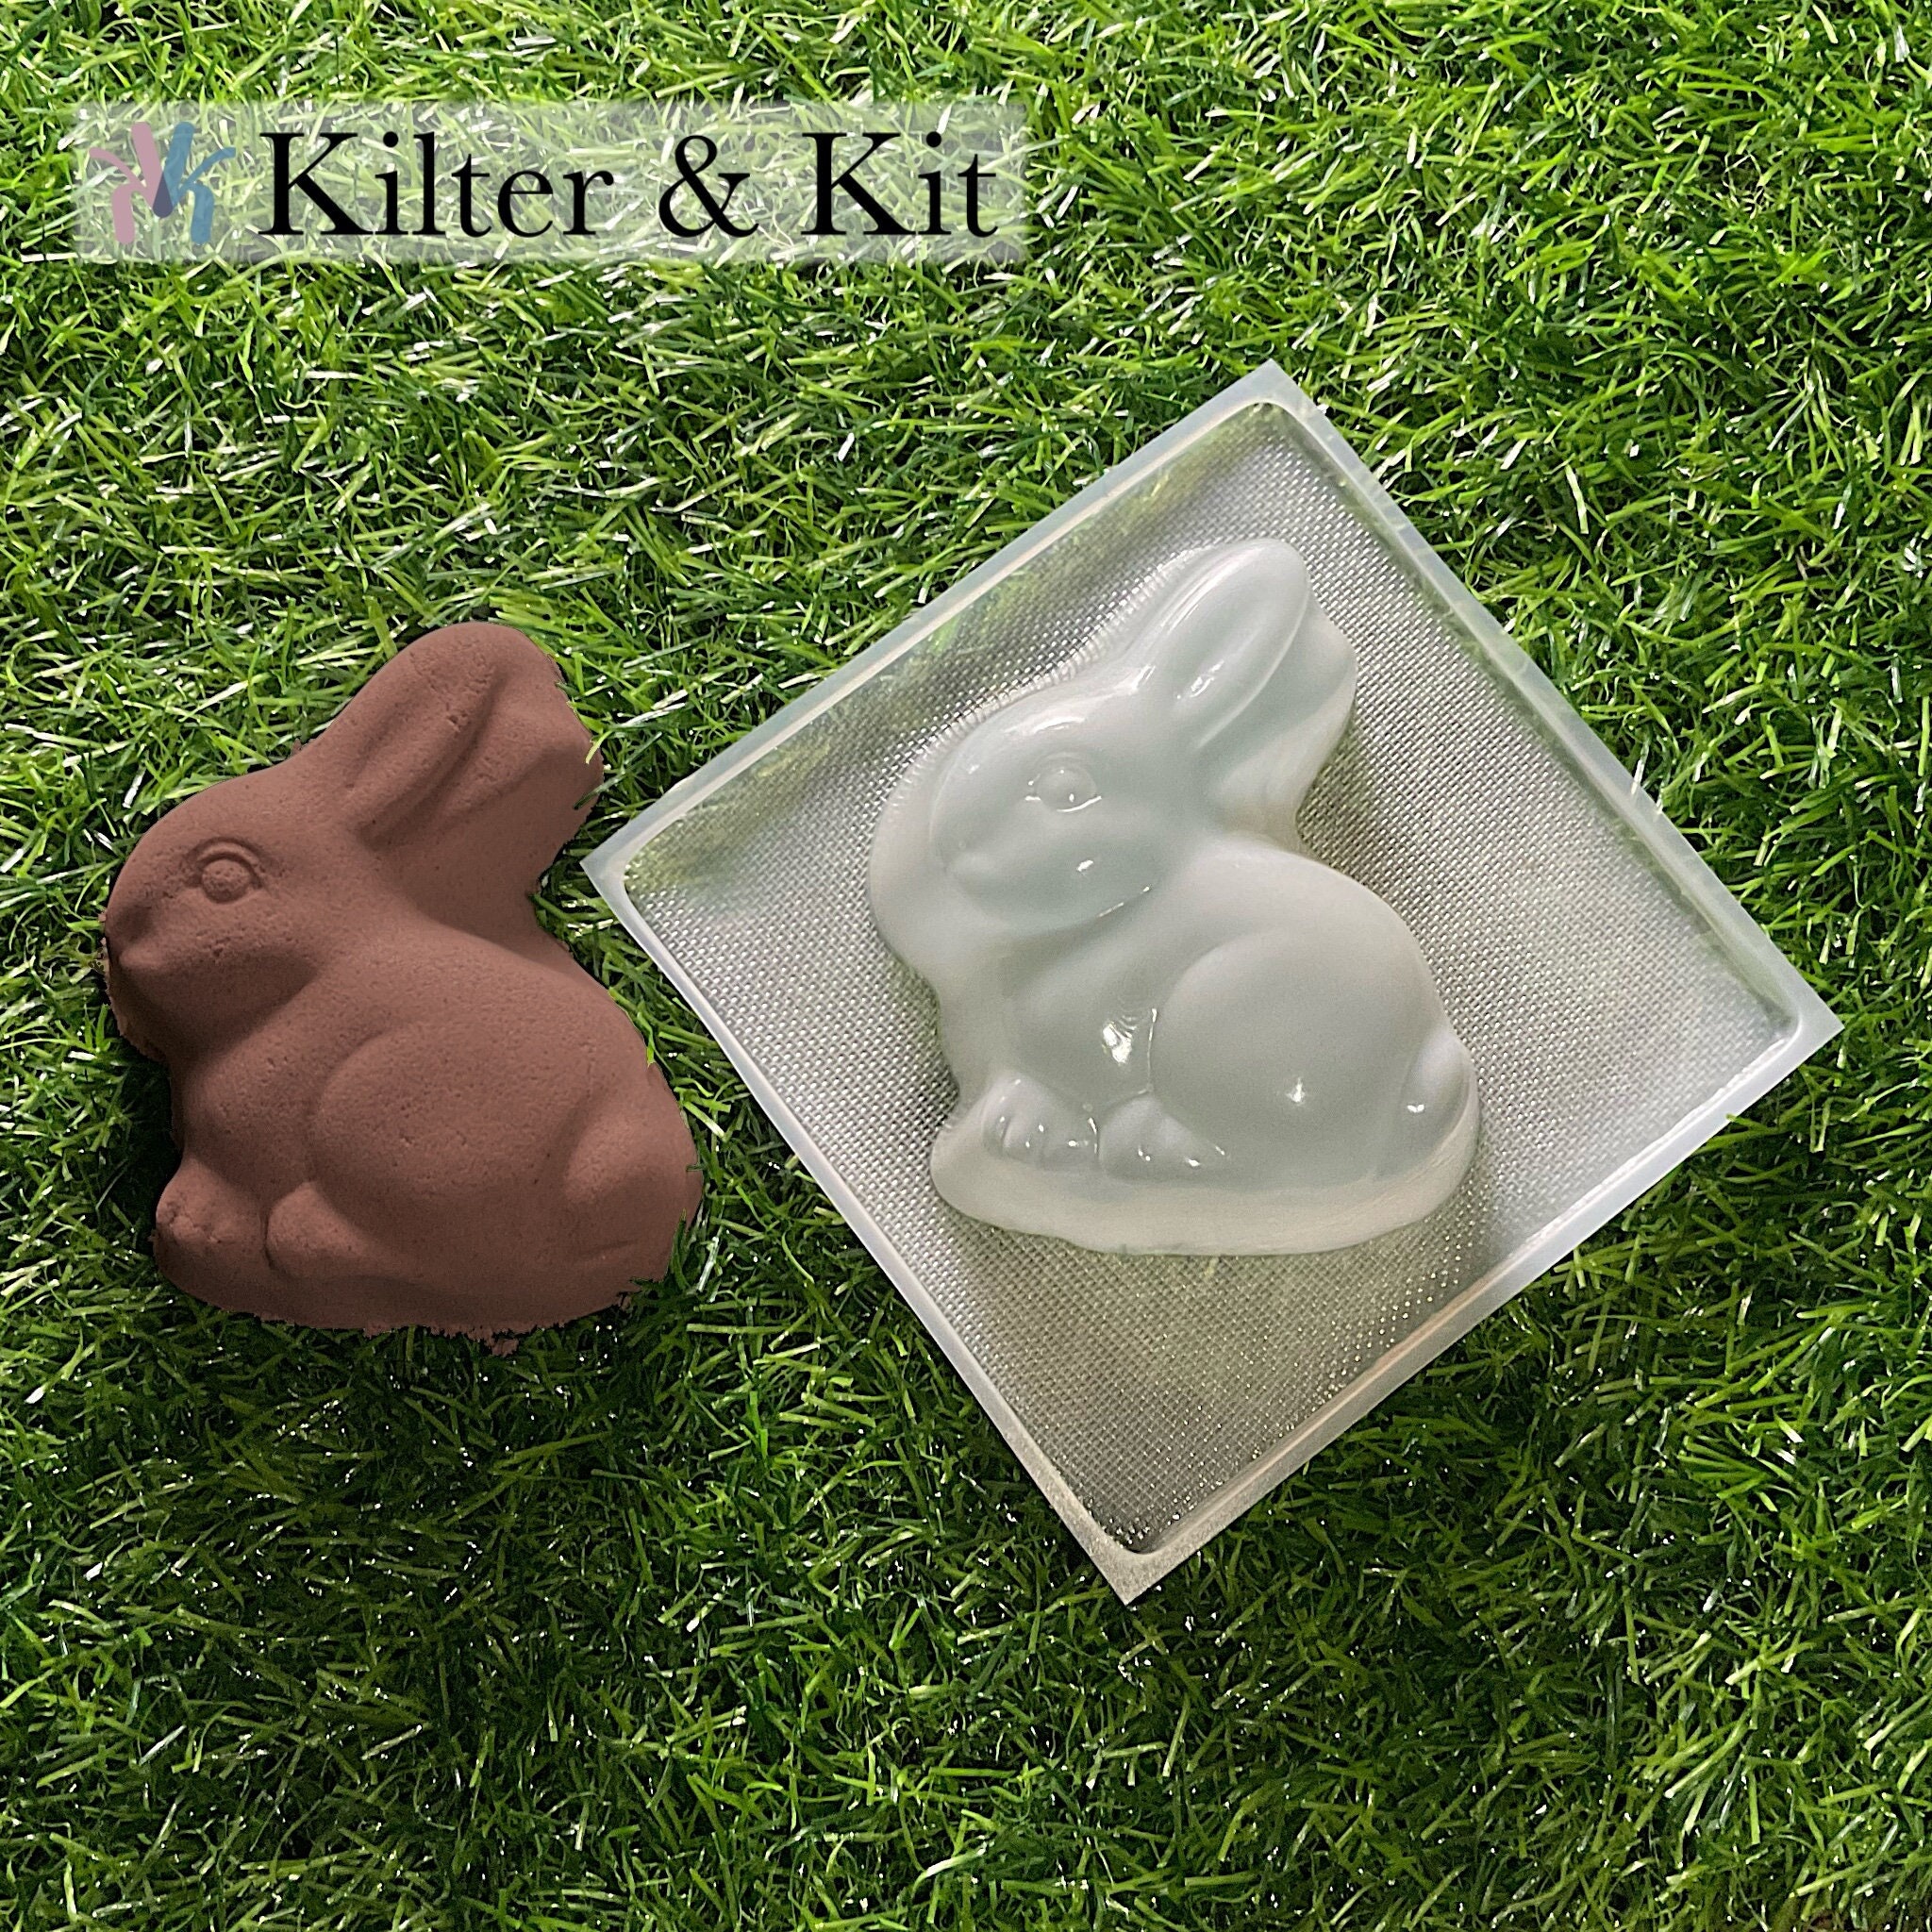 3 Pc Silicone Molds for Chocolate - Easter Hot Cocoa Bomb Mold Egg Rabbit